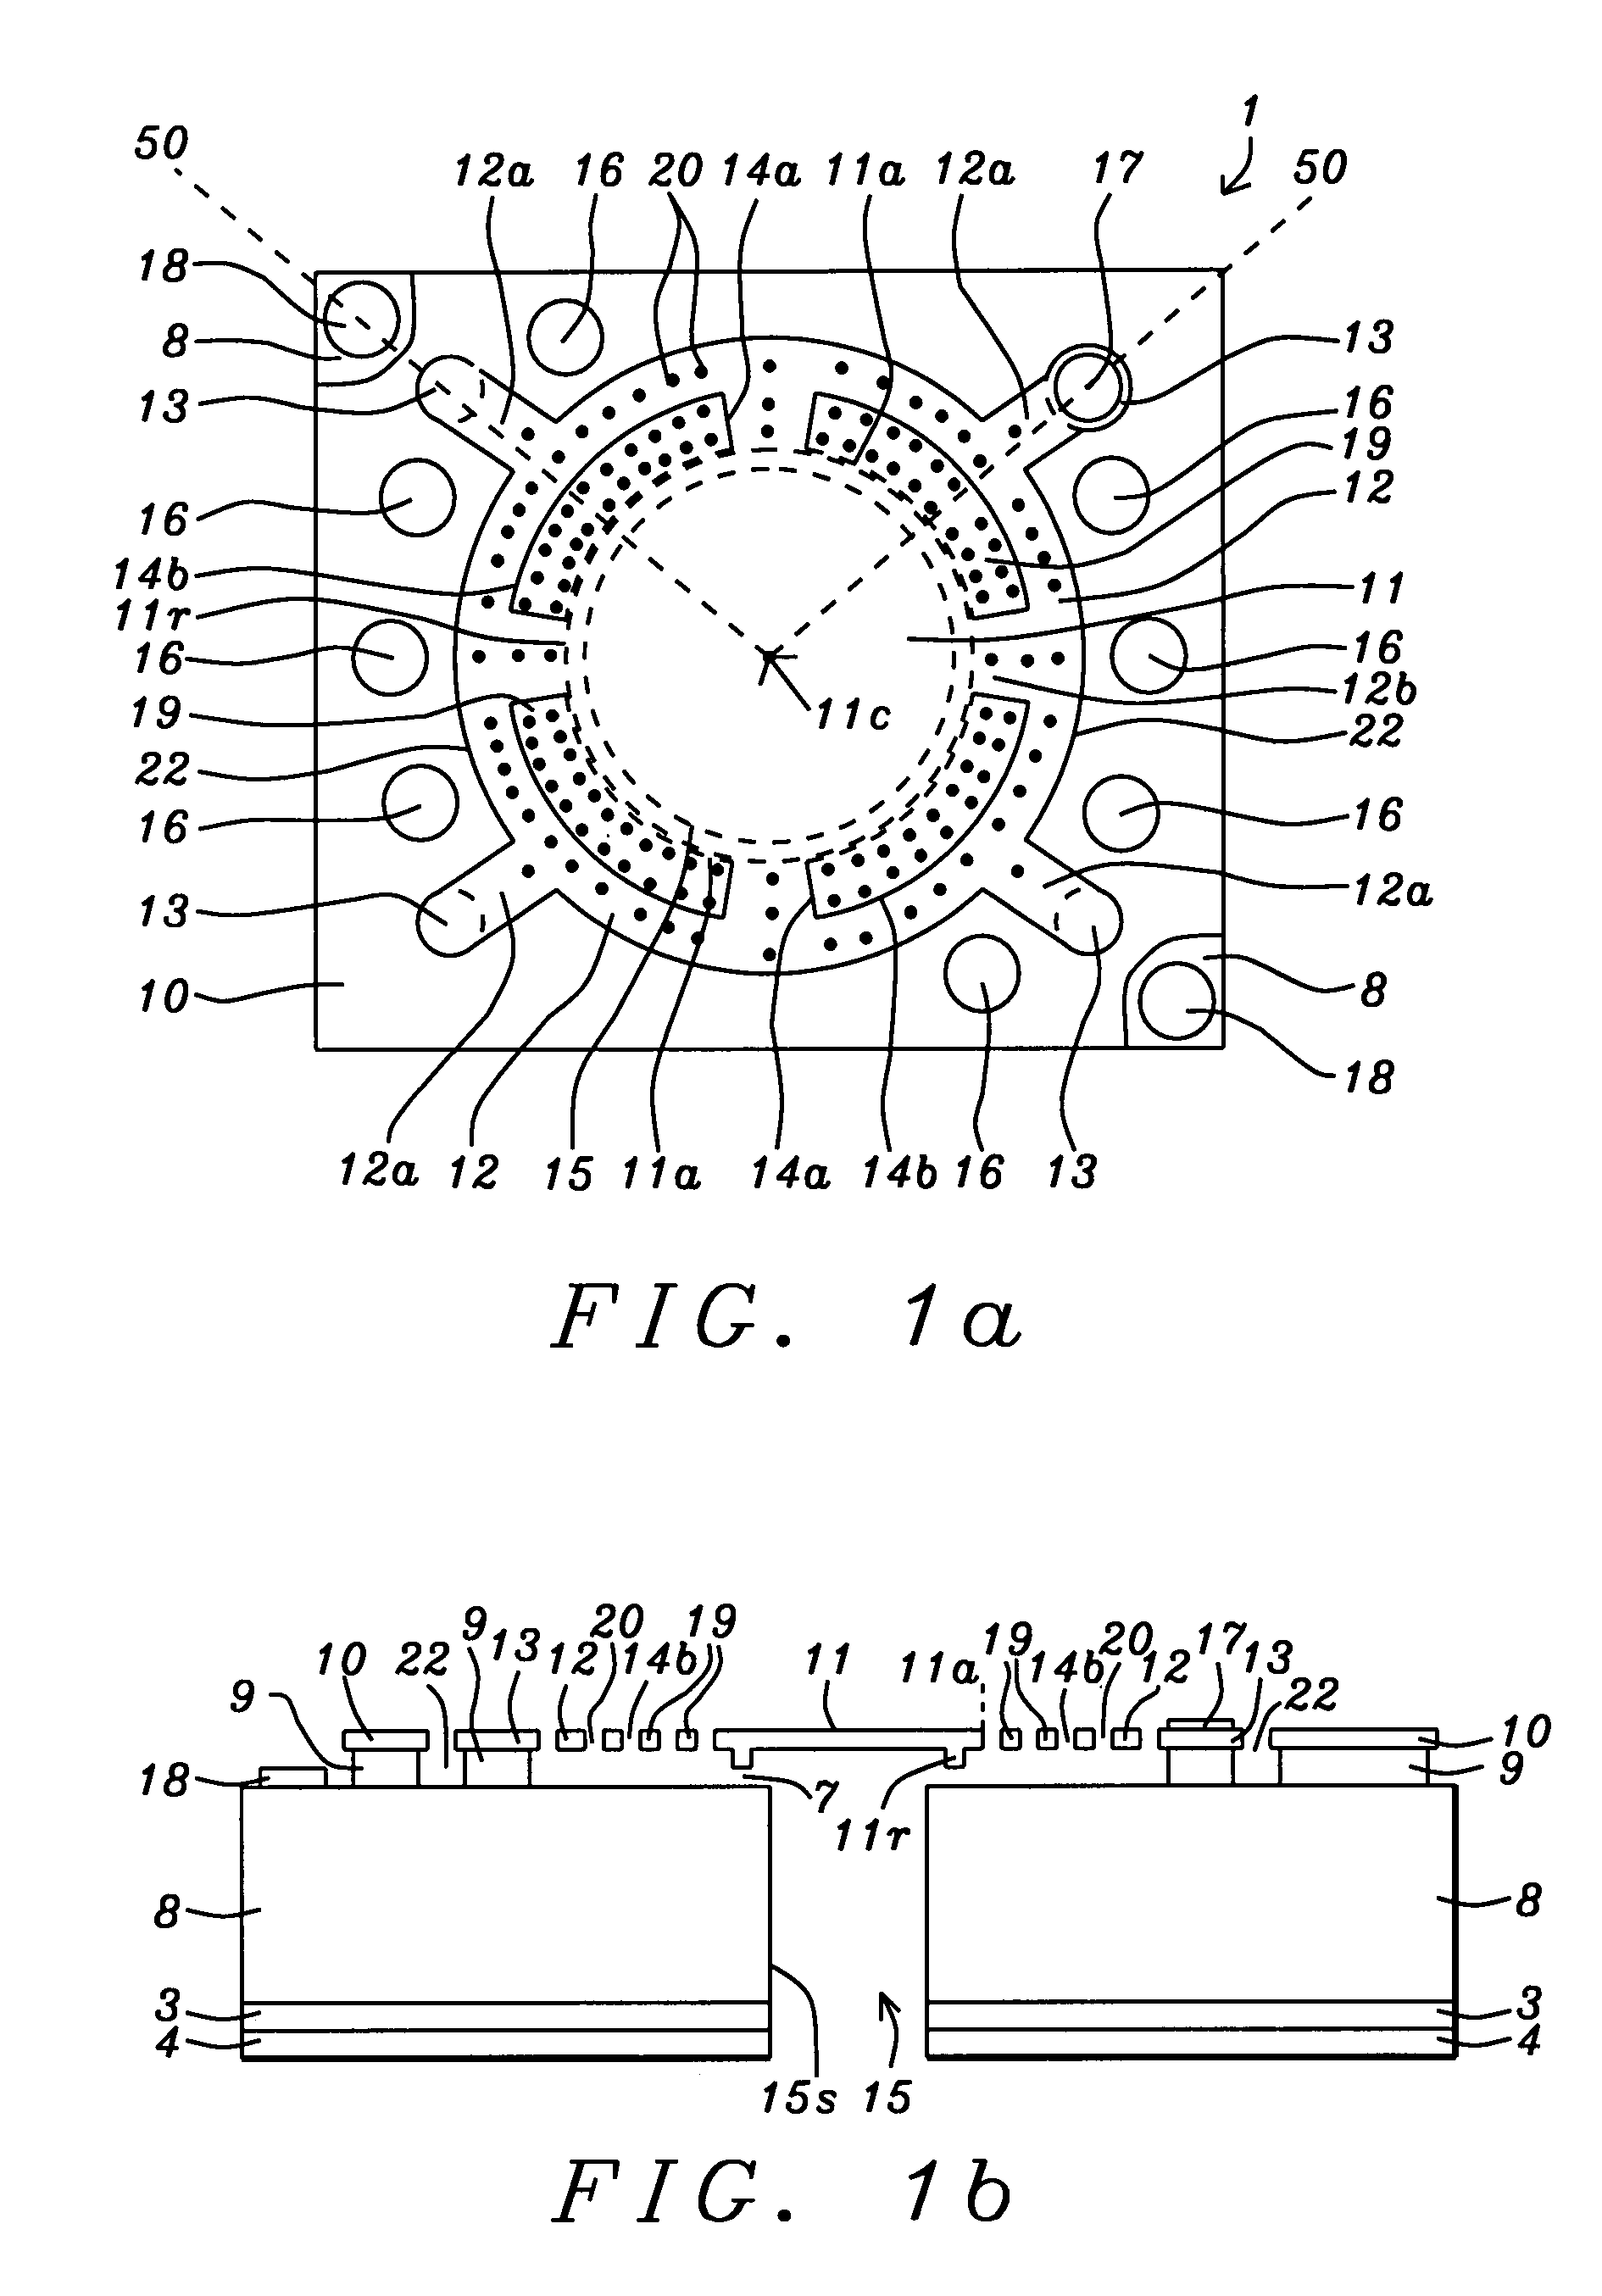 Silicon microphone with enhanced impact proof structure using bonding wires